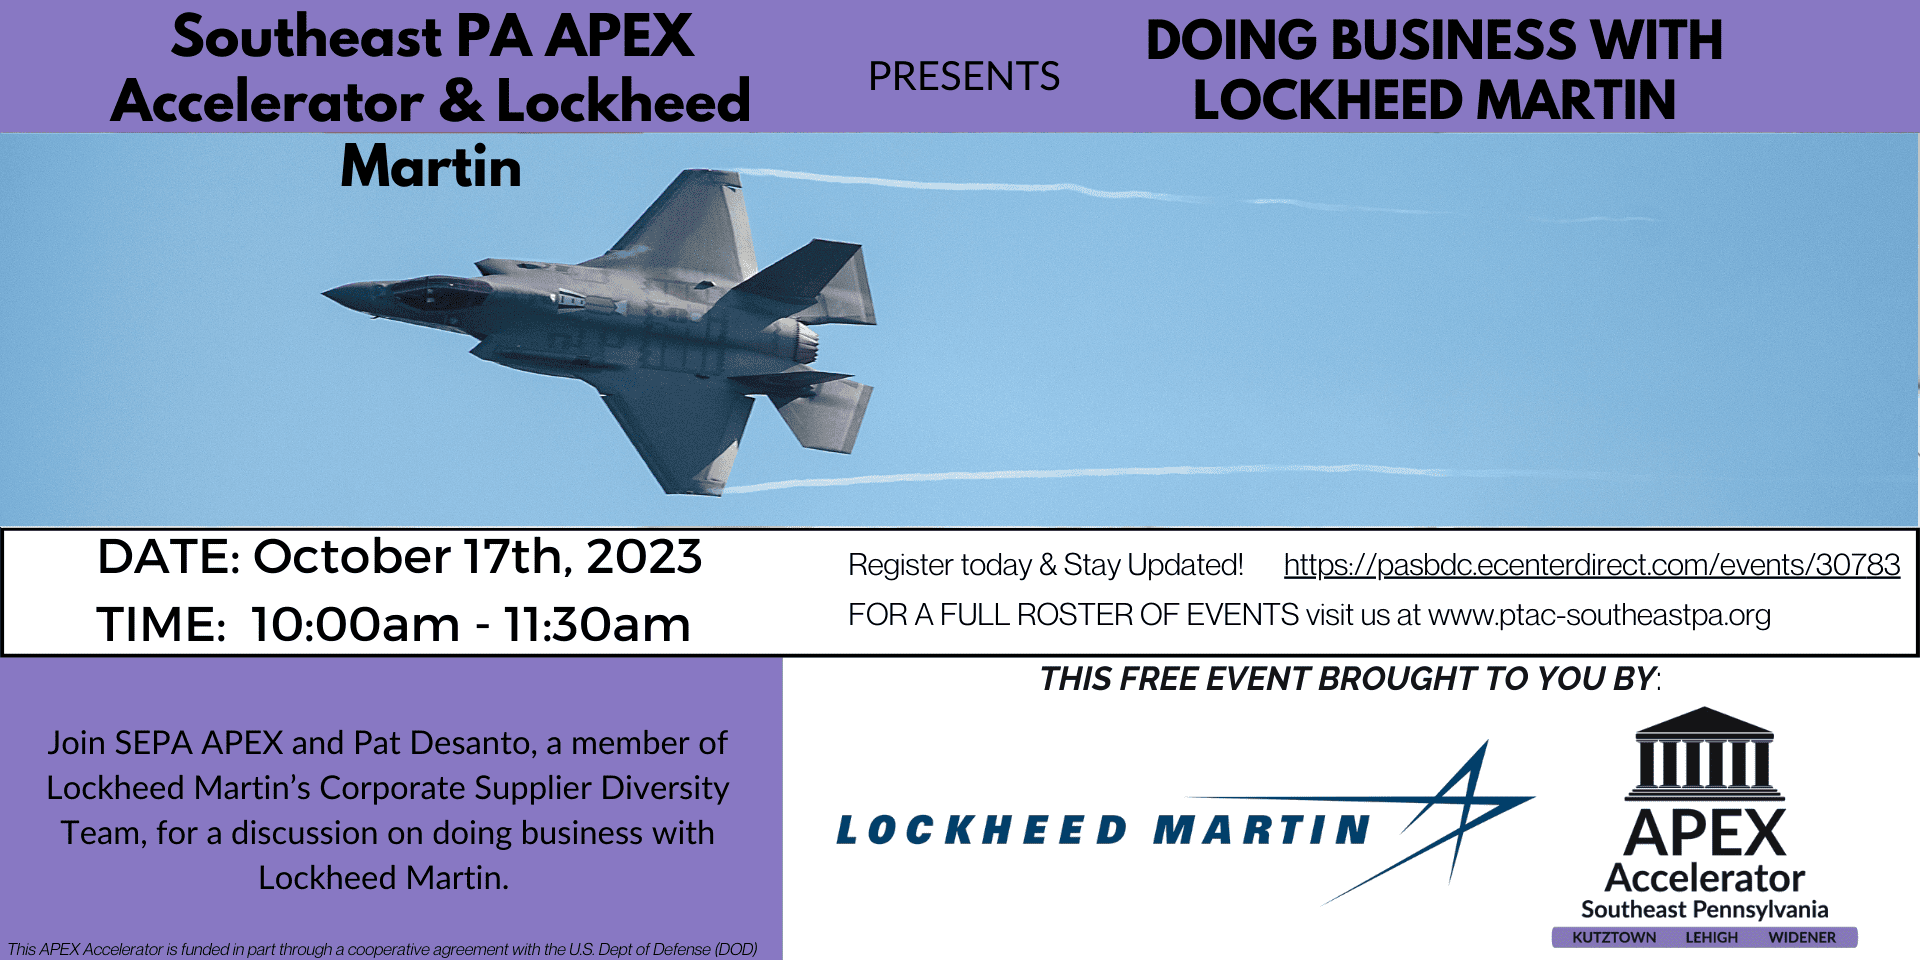 Doing Business with Lockheed Martin